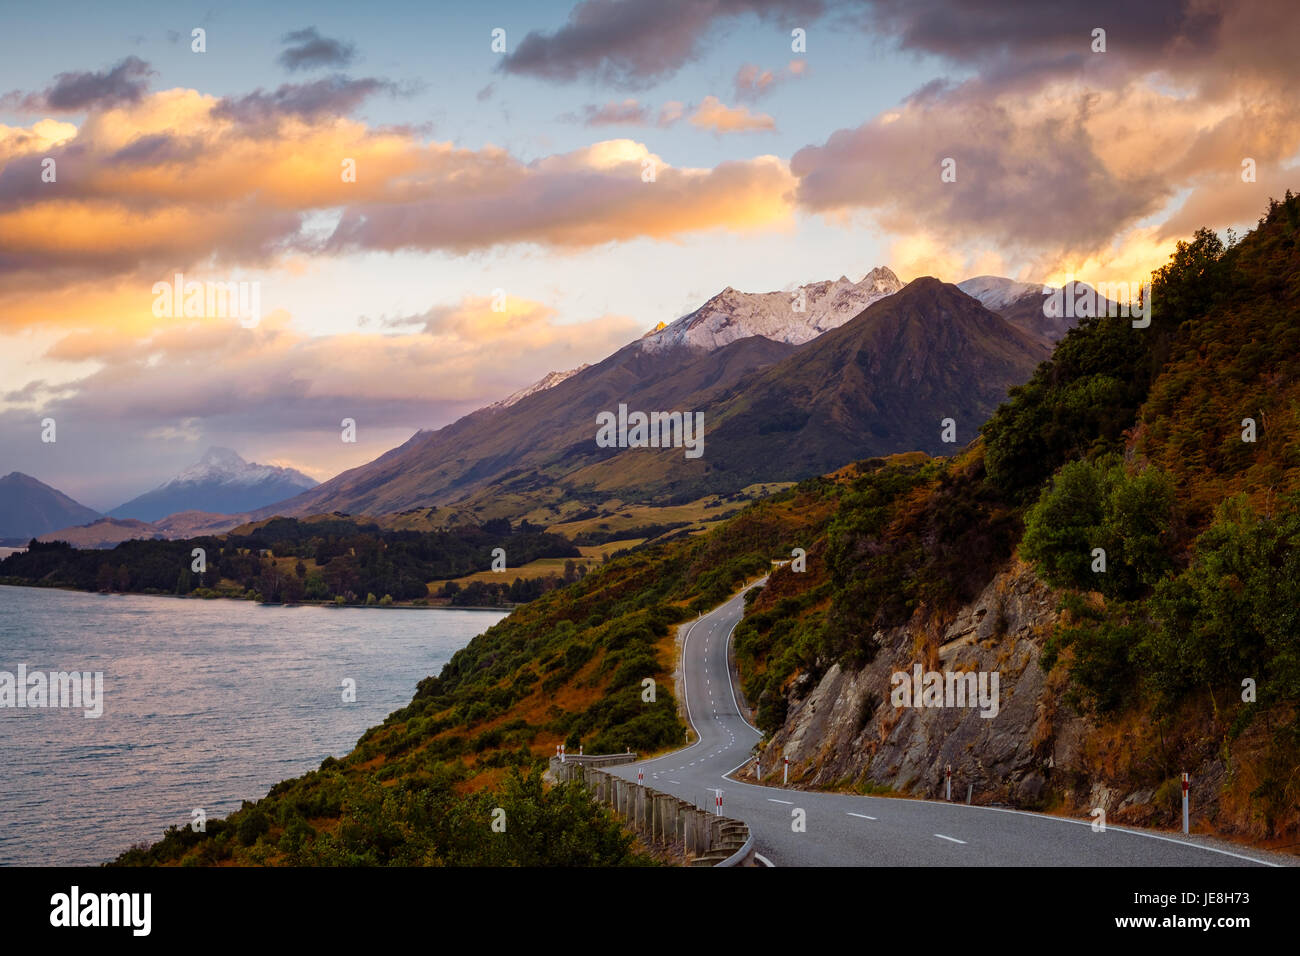 Scenic view of mountain landscape and the road, Bennetts bluff, on the way to Glenorchy, New Zealand Stock Photo